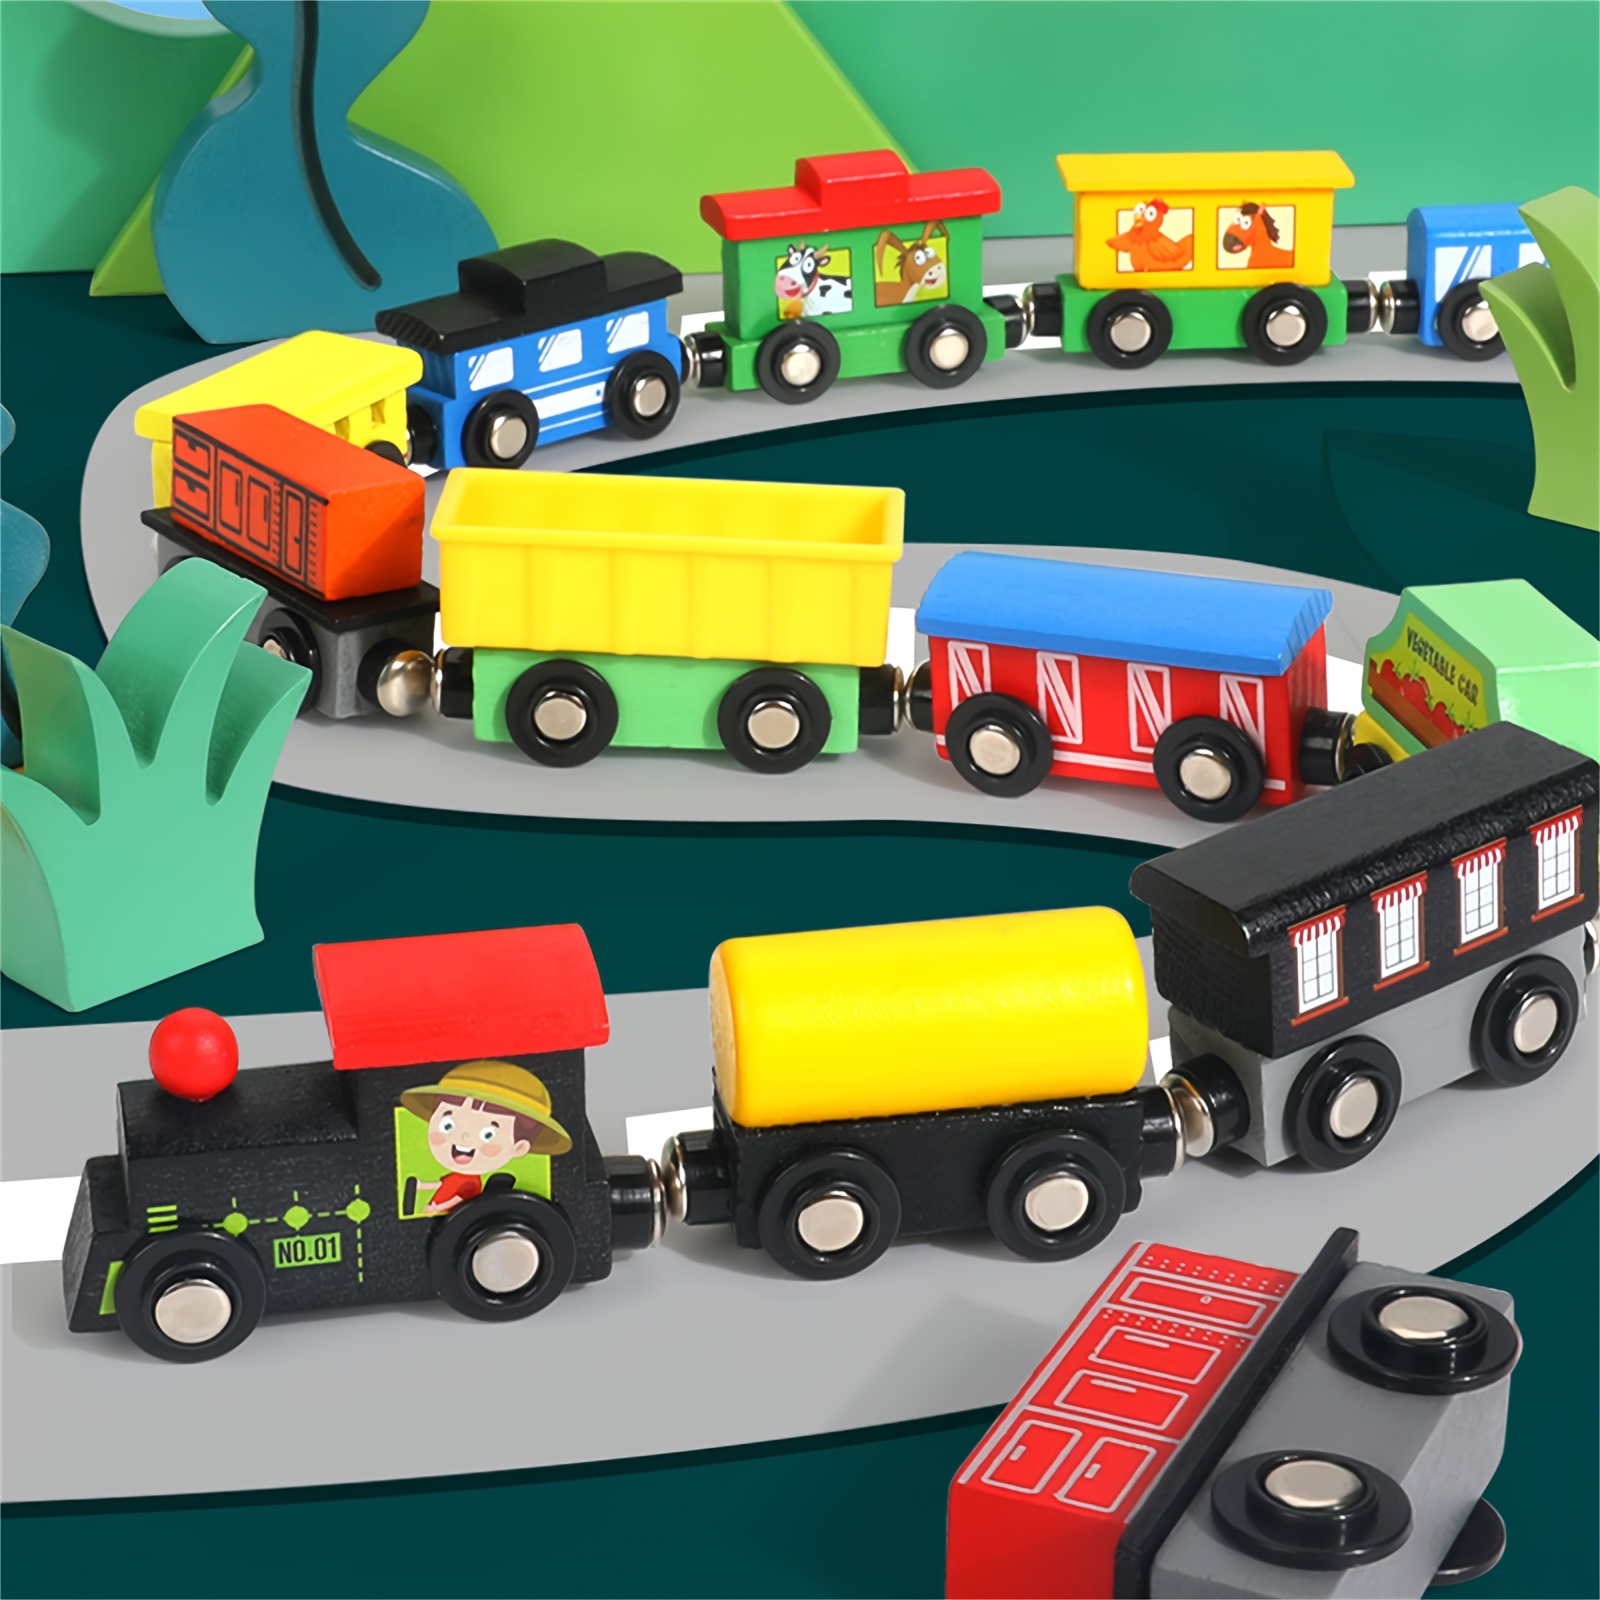 

13-piece Magnetic Wooden Train Set For Kids Ages 3-6 - Compatible With Major Brand Tracks, Perfect For Toddlers' Playtime